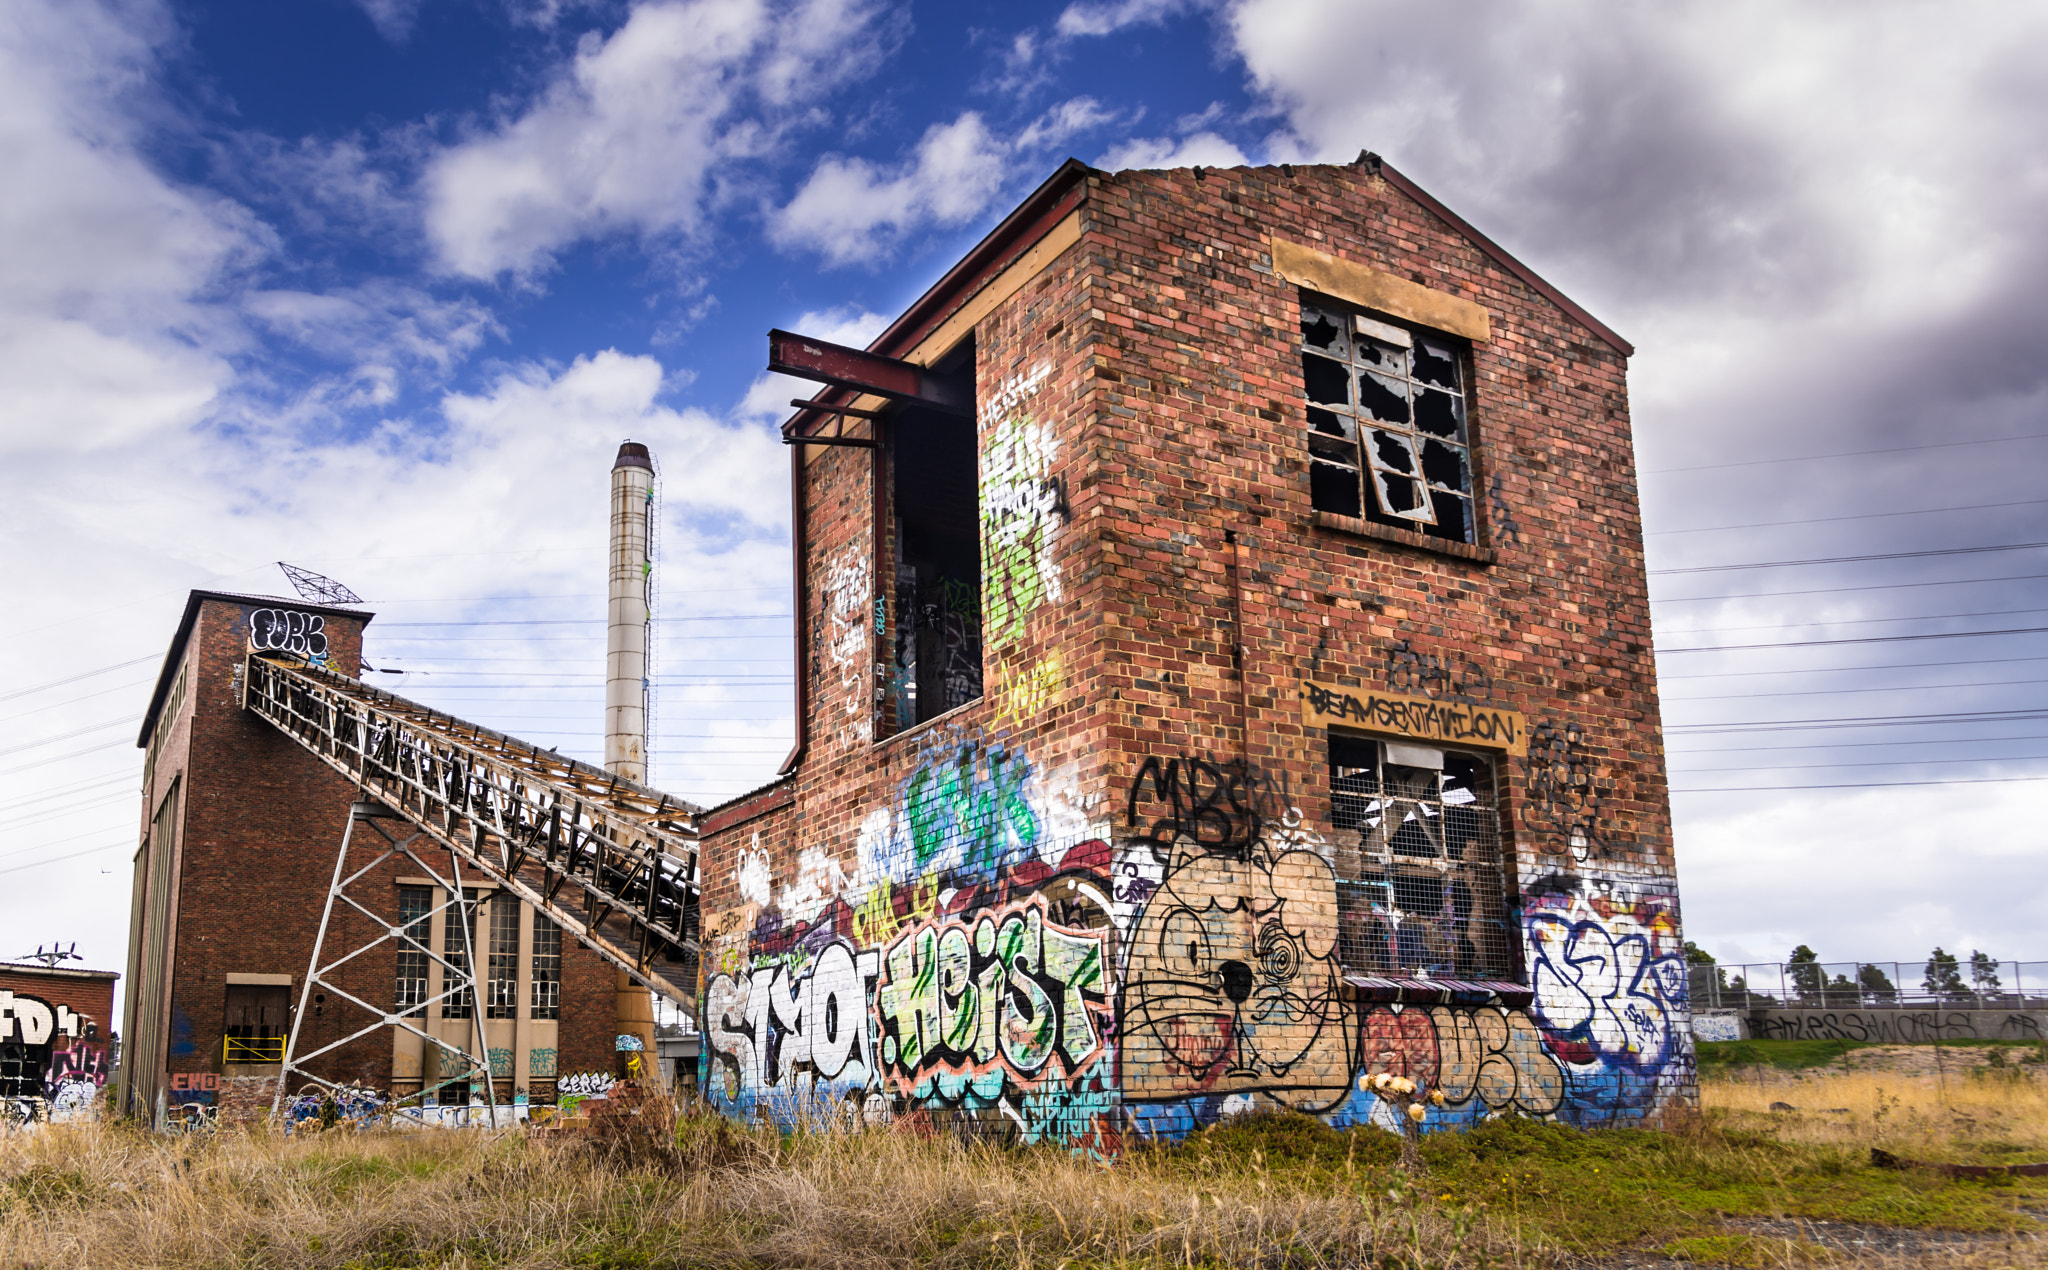 Tamron AF 18-250mm F3.5-6.3 Di II LD Aspherical (IF) Macro sample photo. Bradmills abandoned textile factory 02 photography